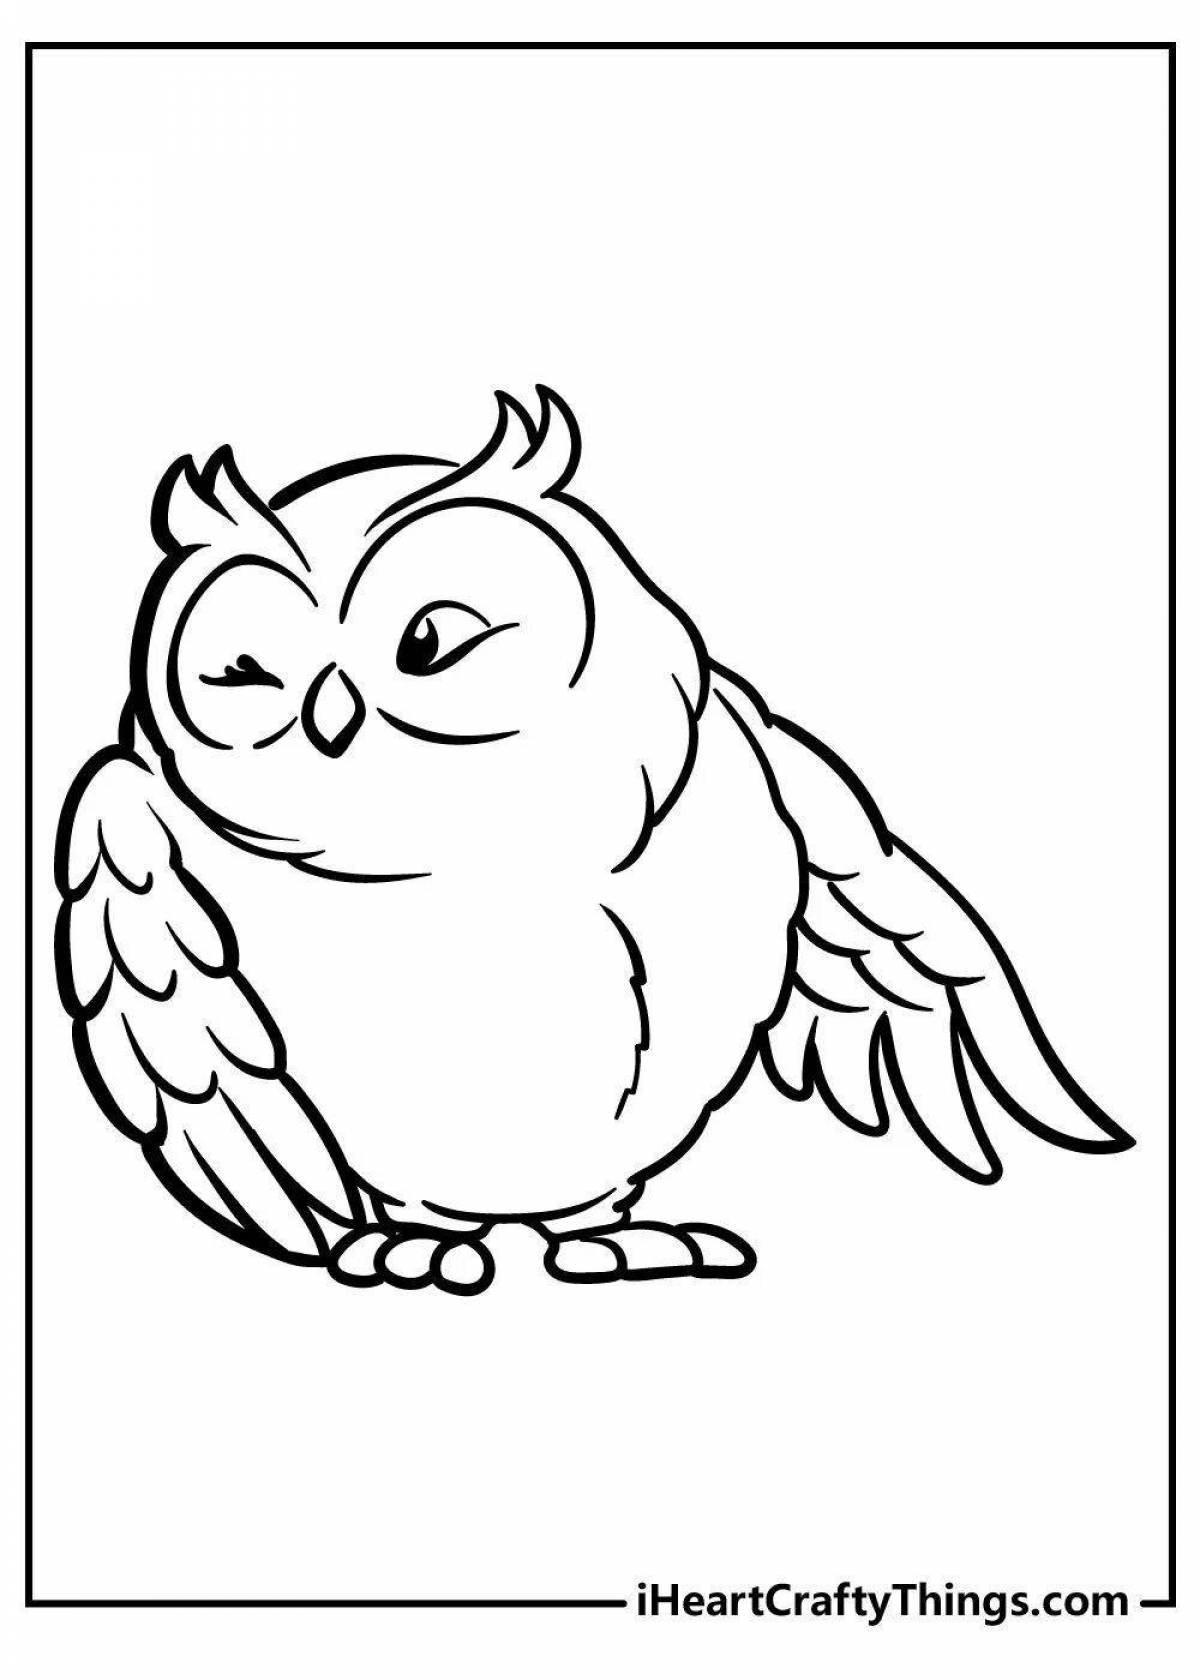 Fun coloring book snowy owl for the little ones